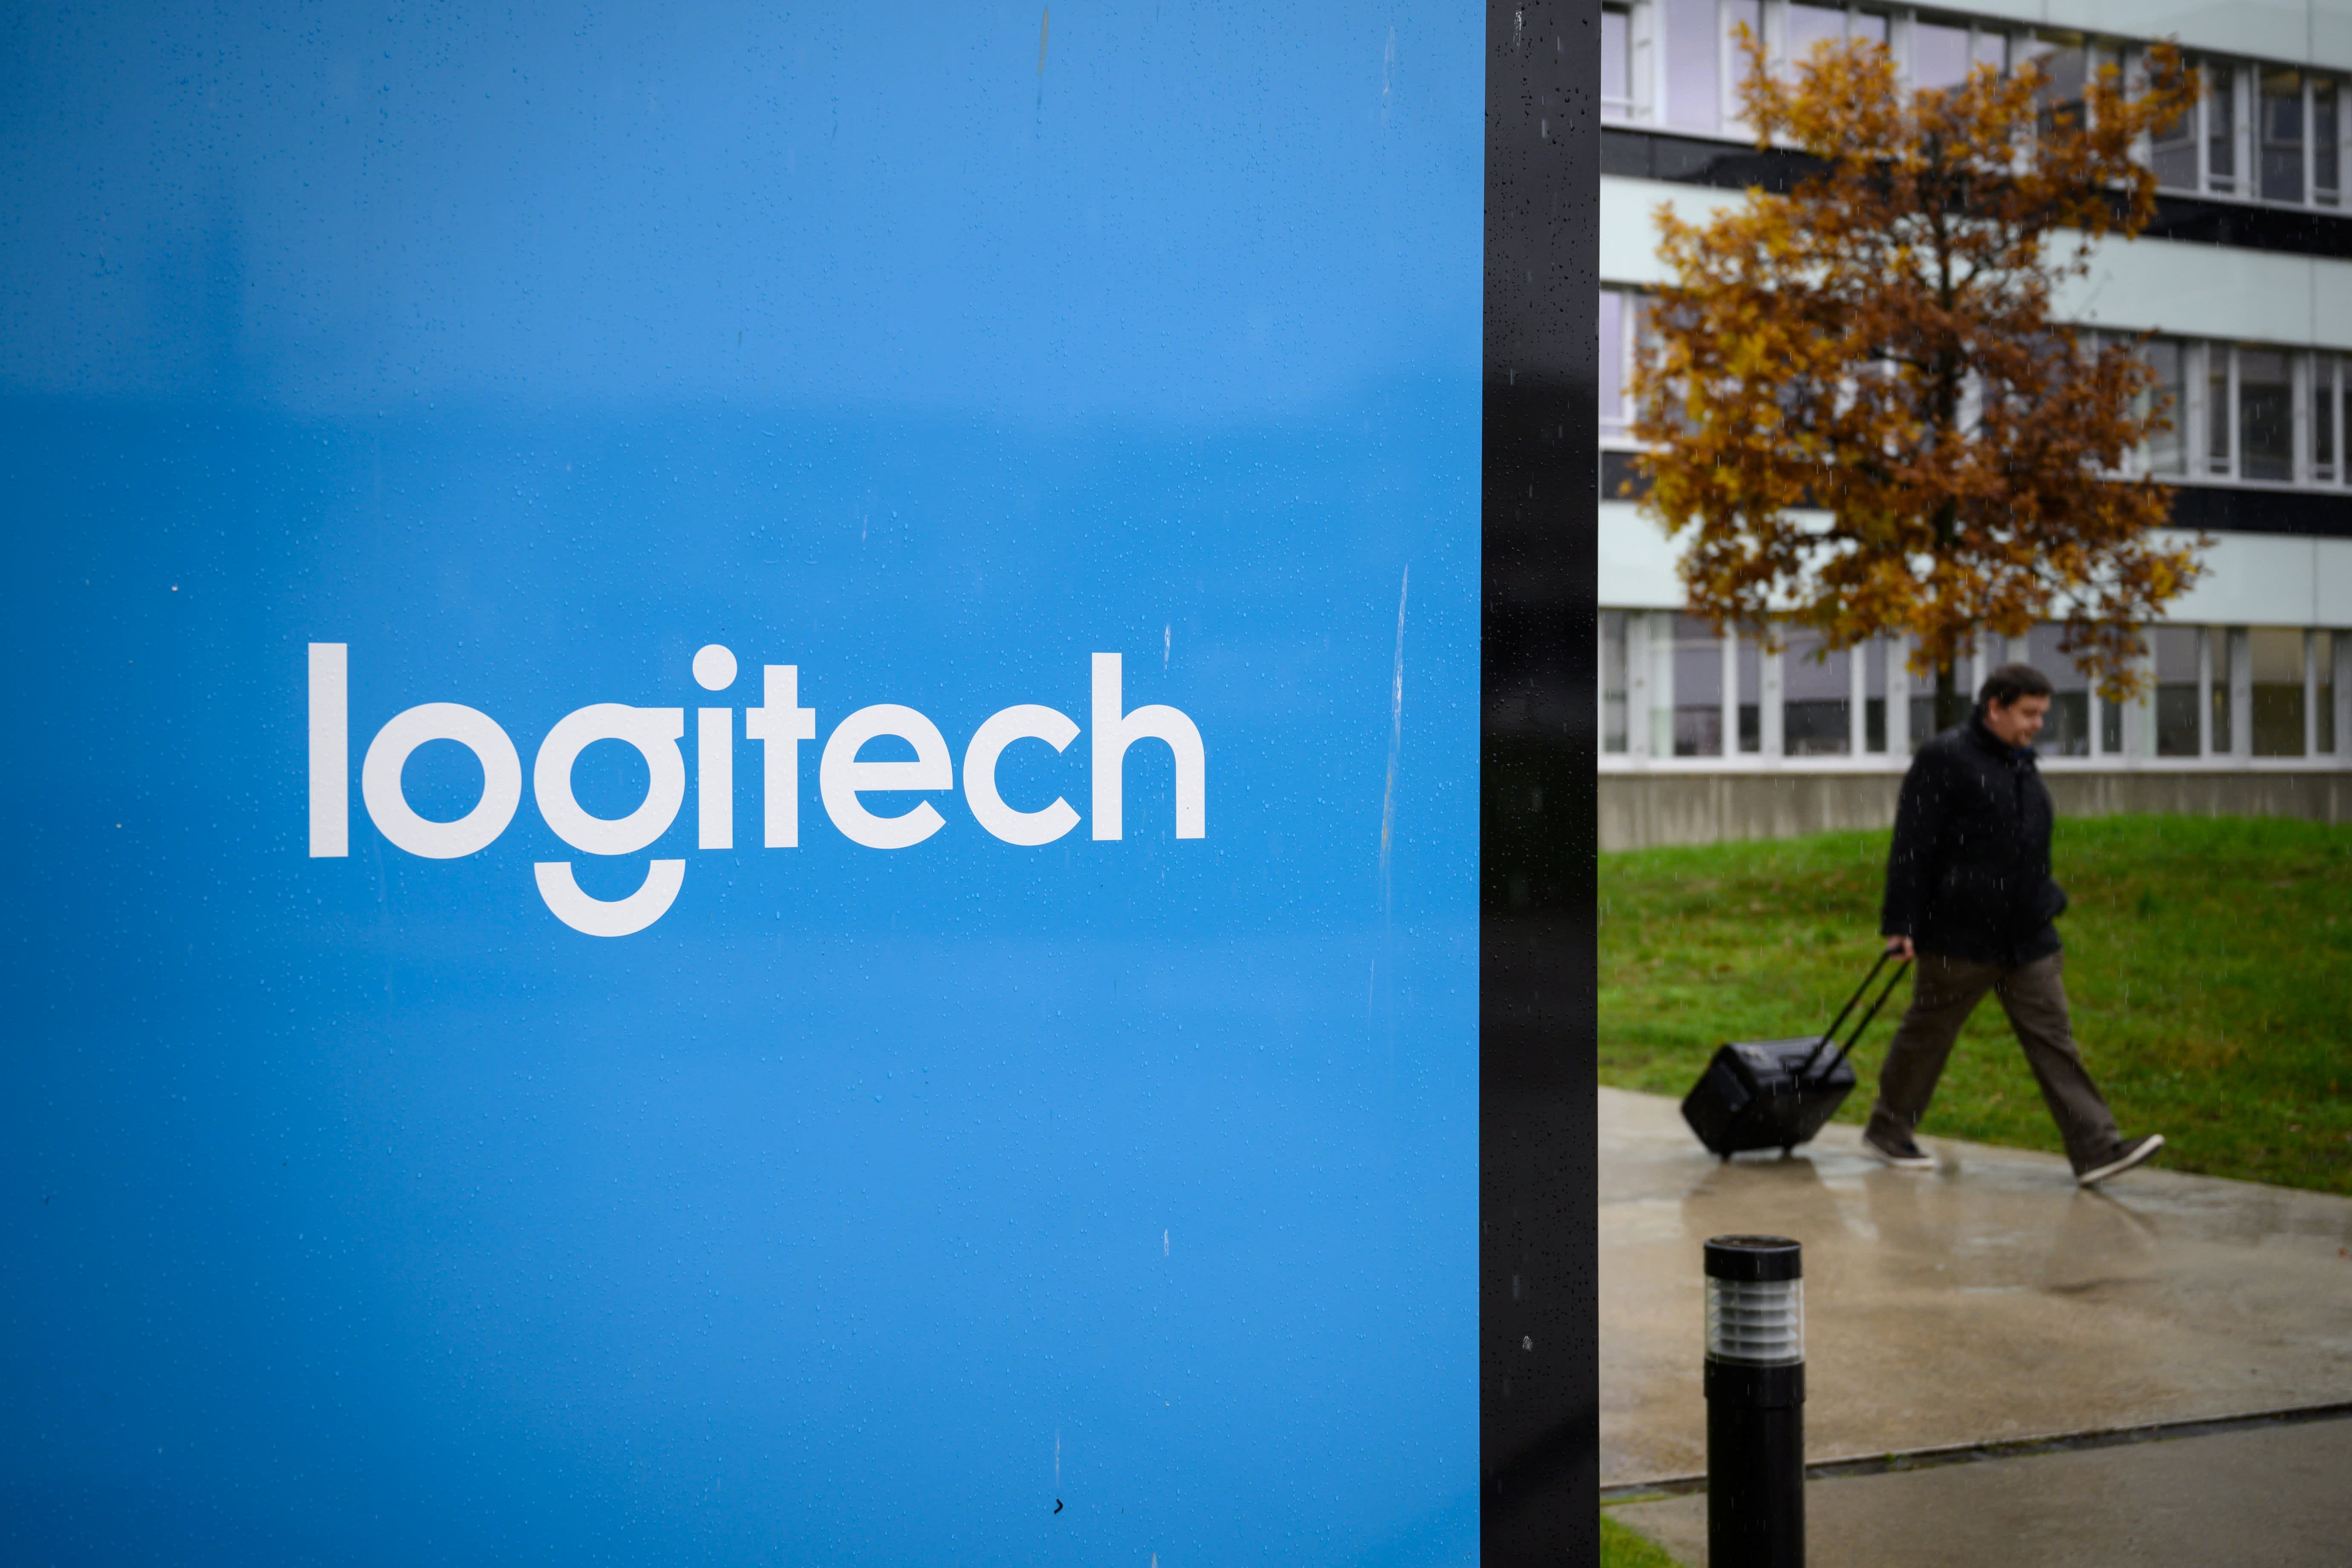 Credit Suisse downgrades Logitech, says there's little hope for growth ahead